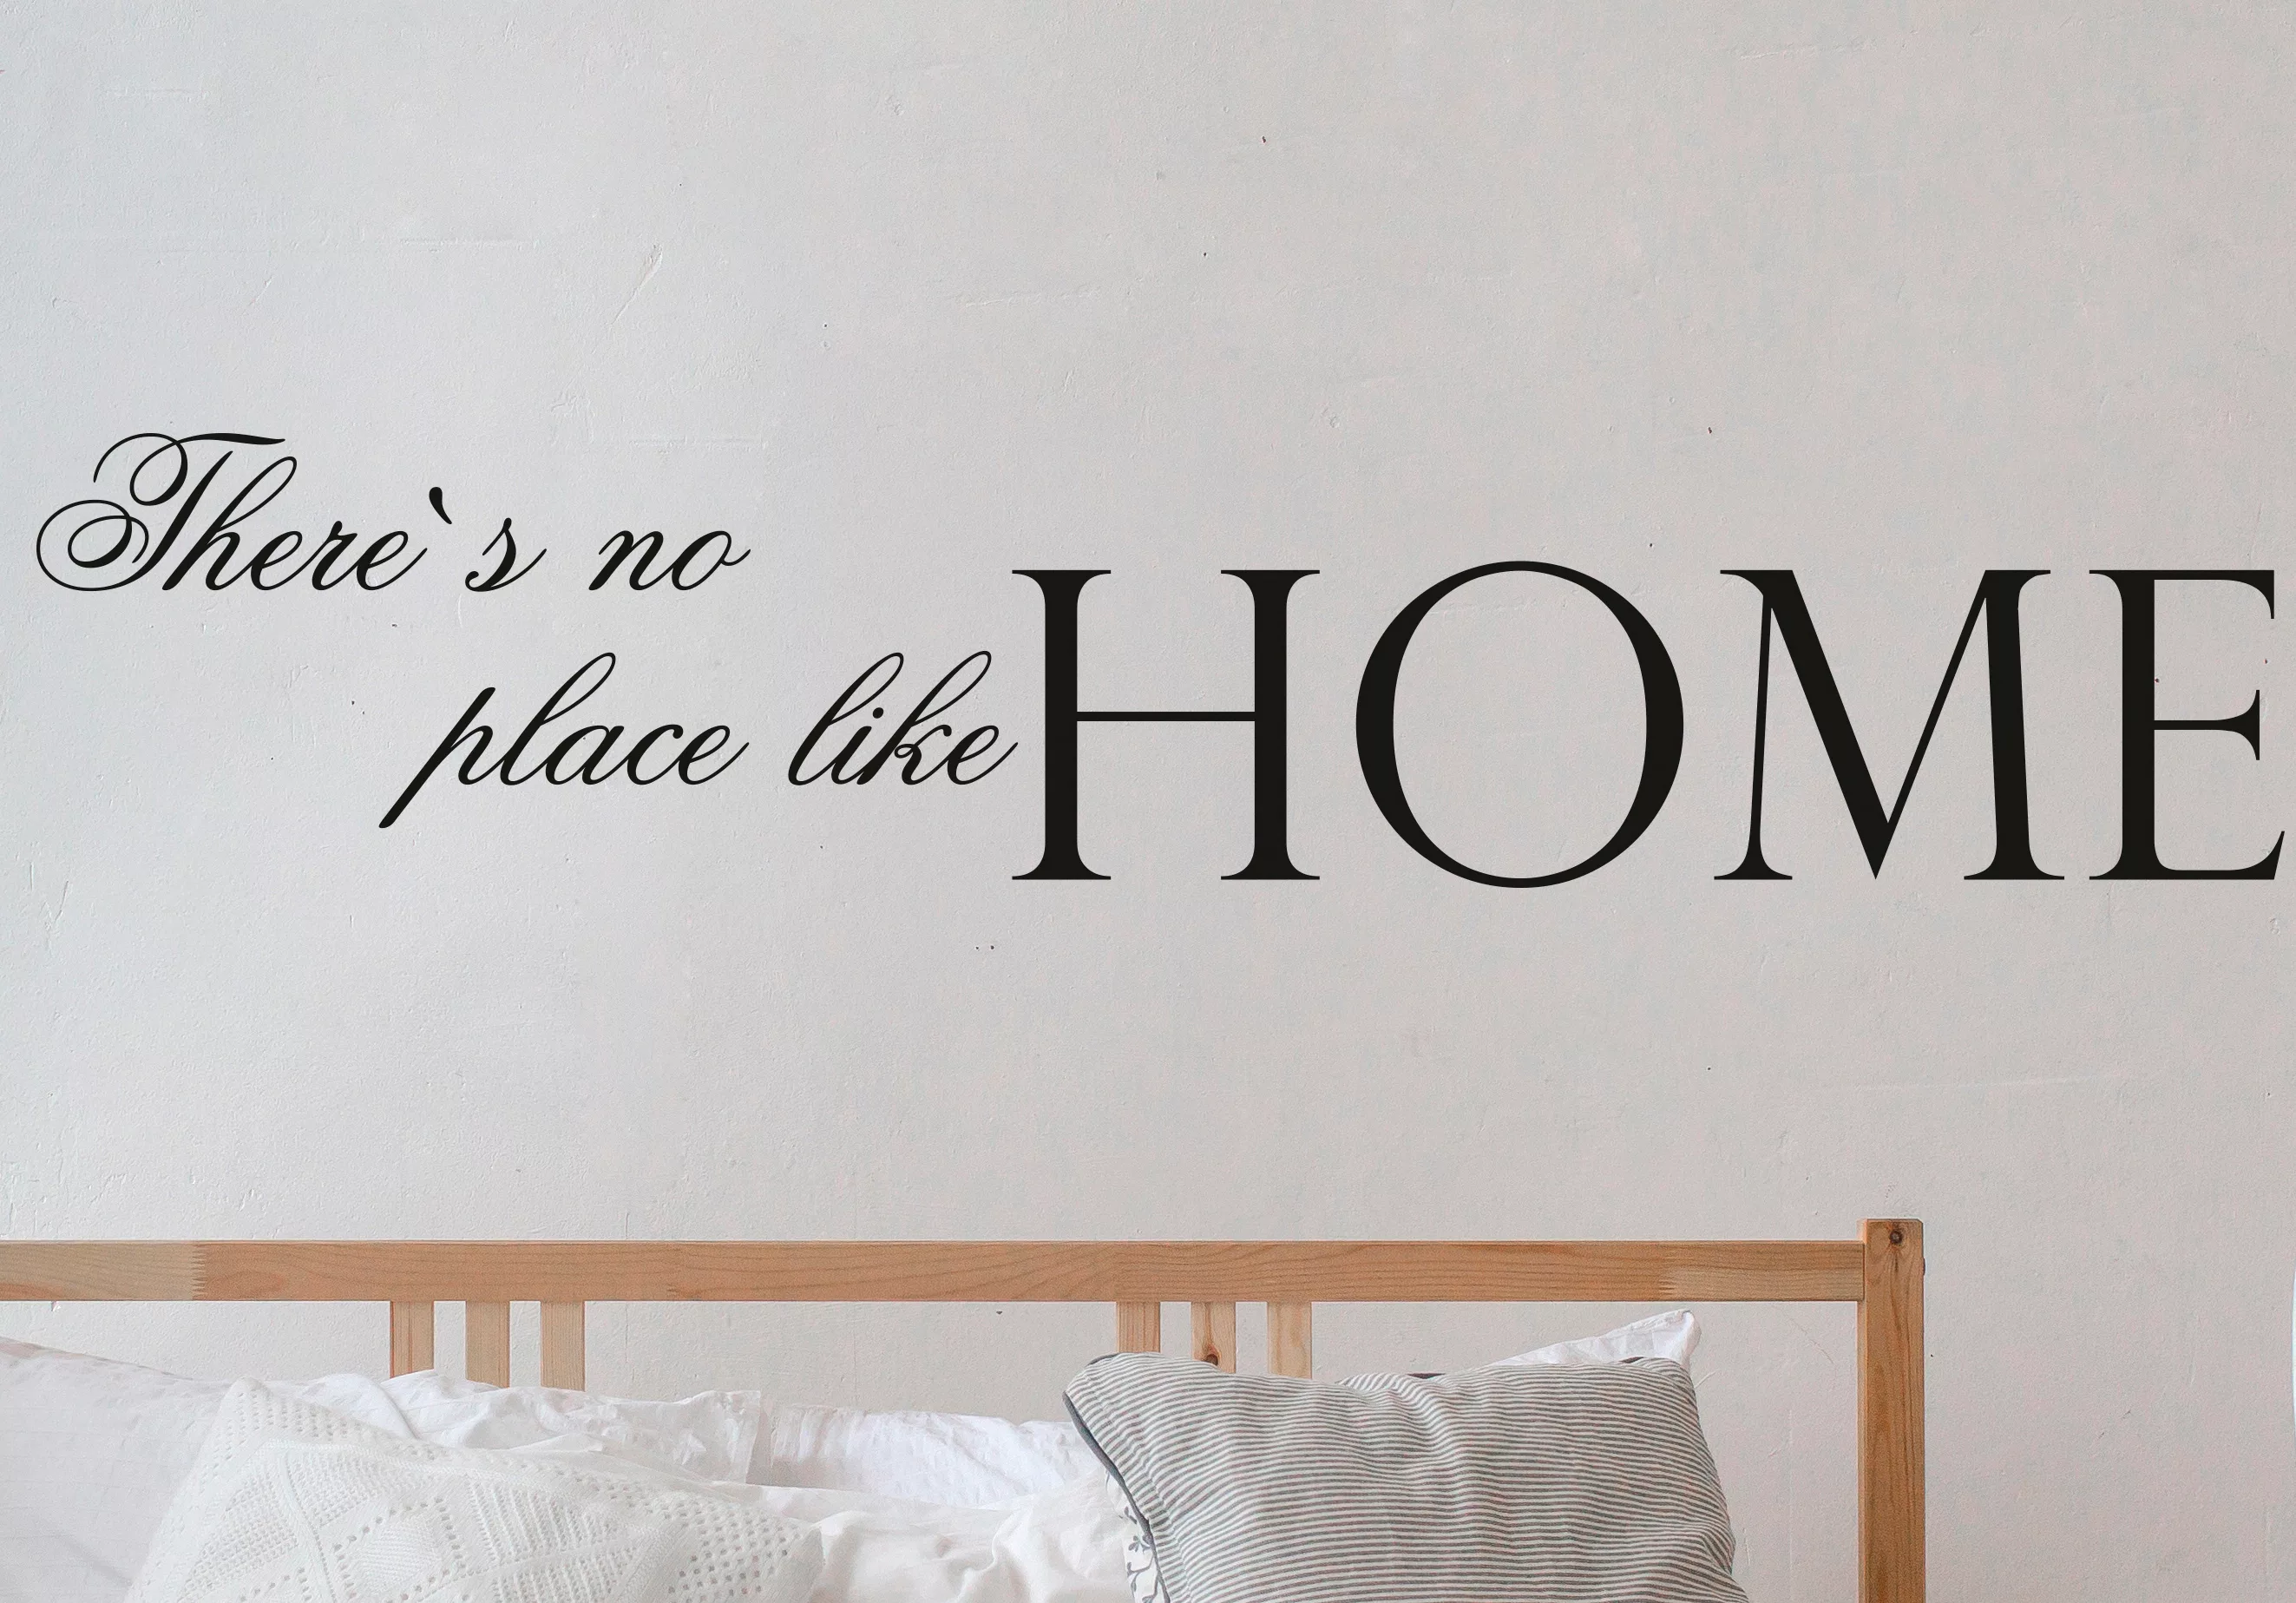 queence Wandtattoo "Theres no place like Home" günstig online kaufen